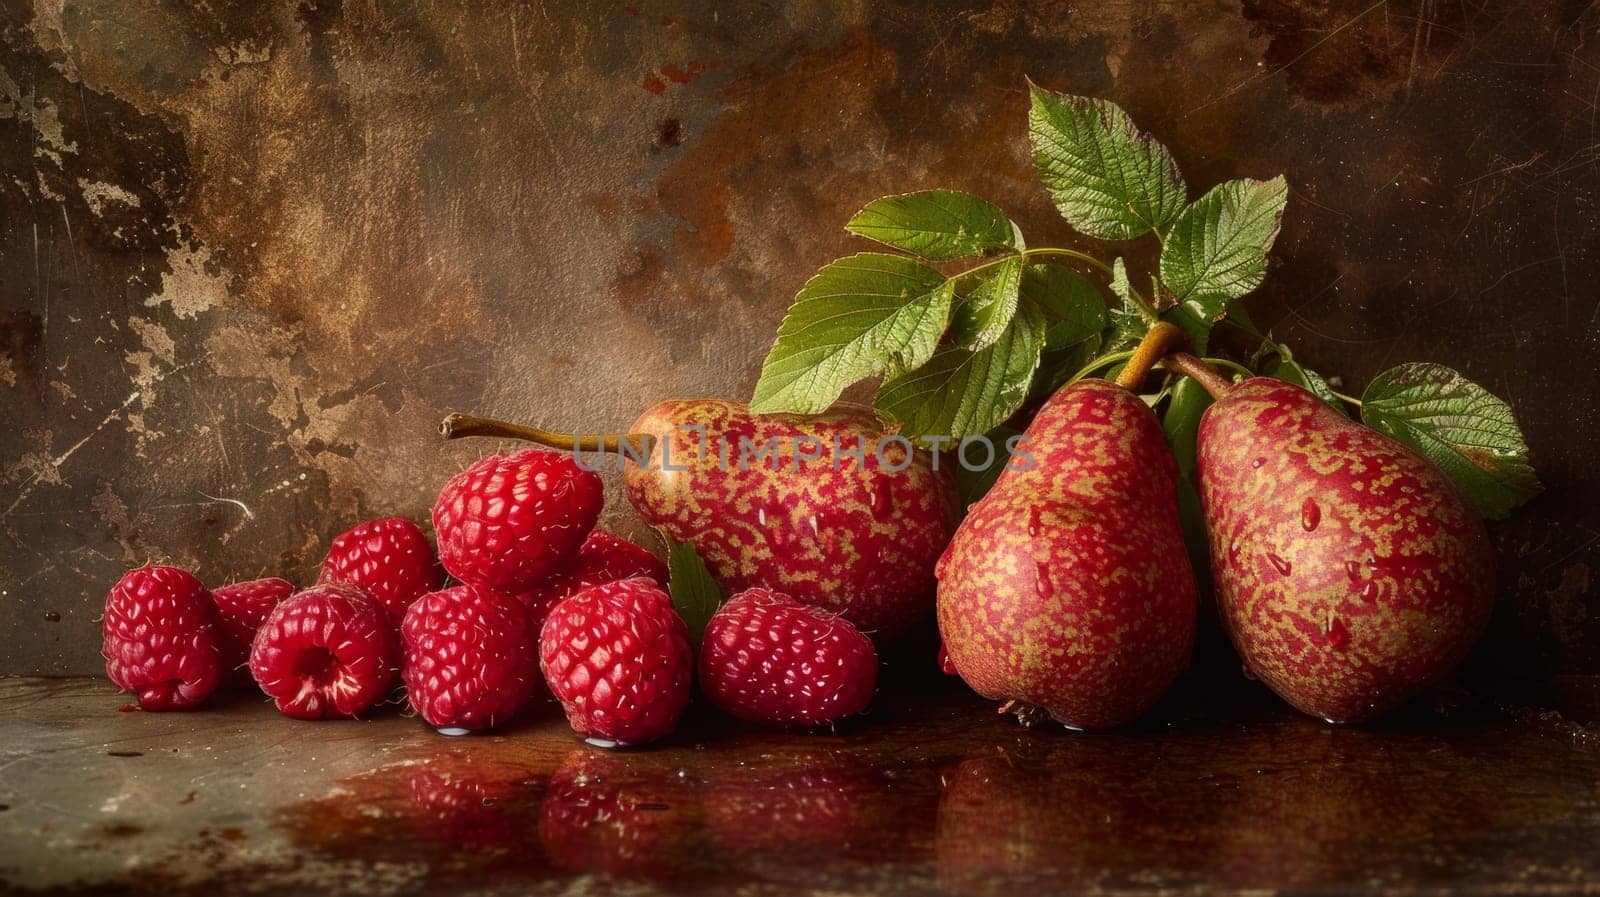 A bunch of raspberries and pears are sitting on a table